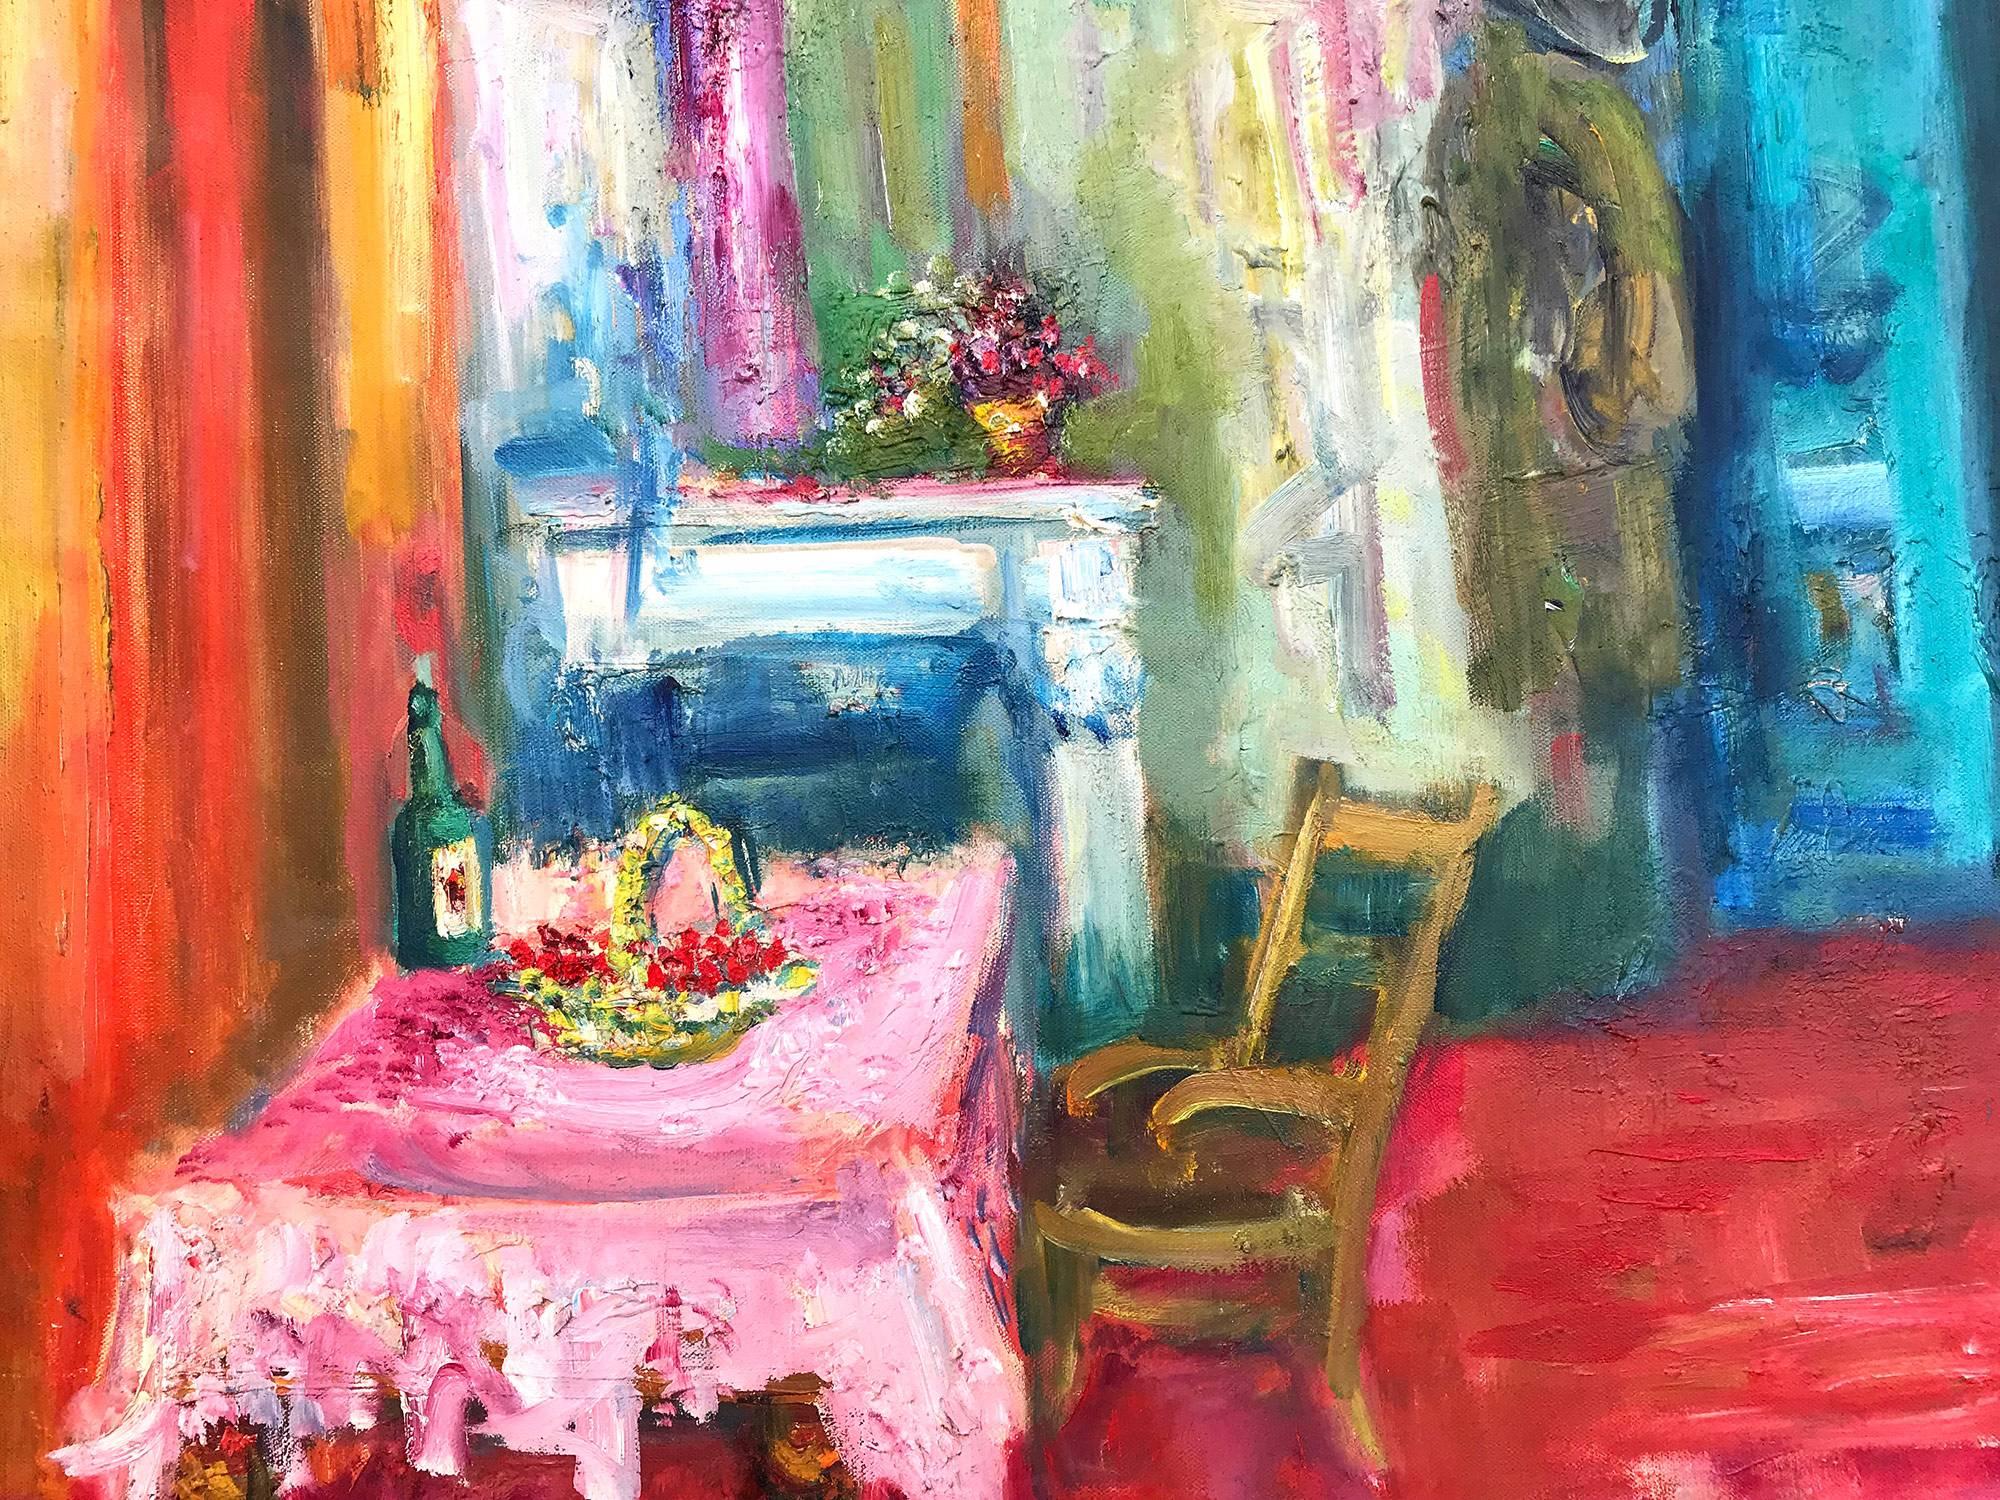 Interior Scene with Wine bottle - Impressionist Painting by Jacques Zucker